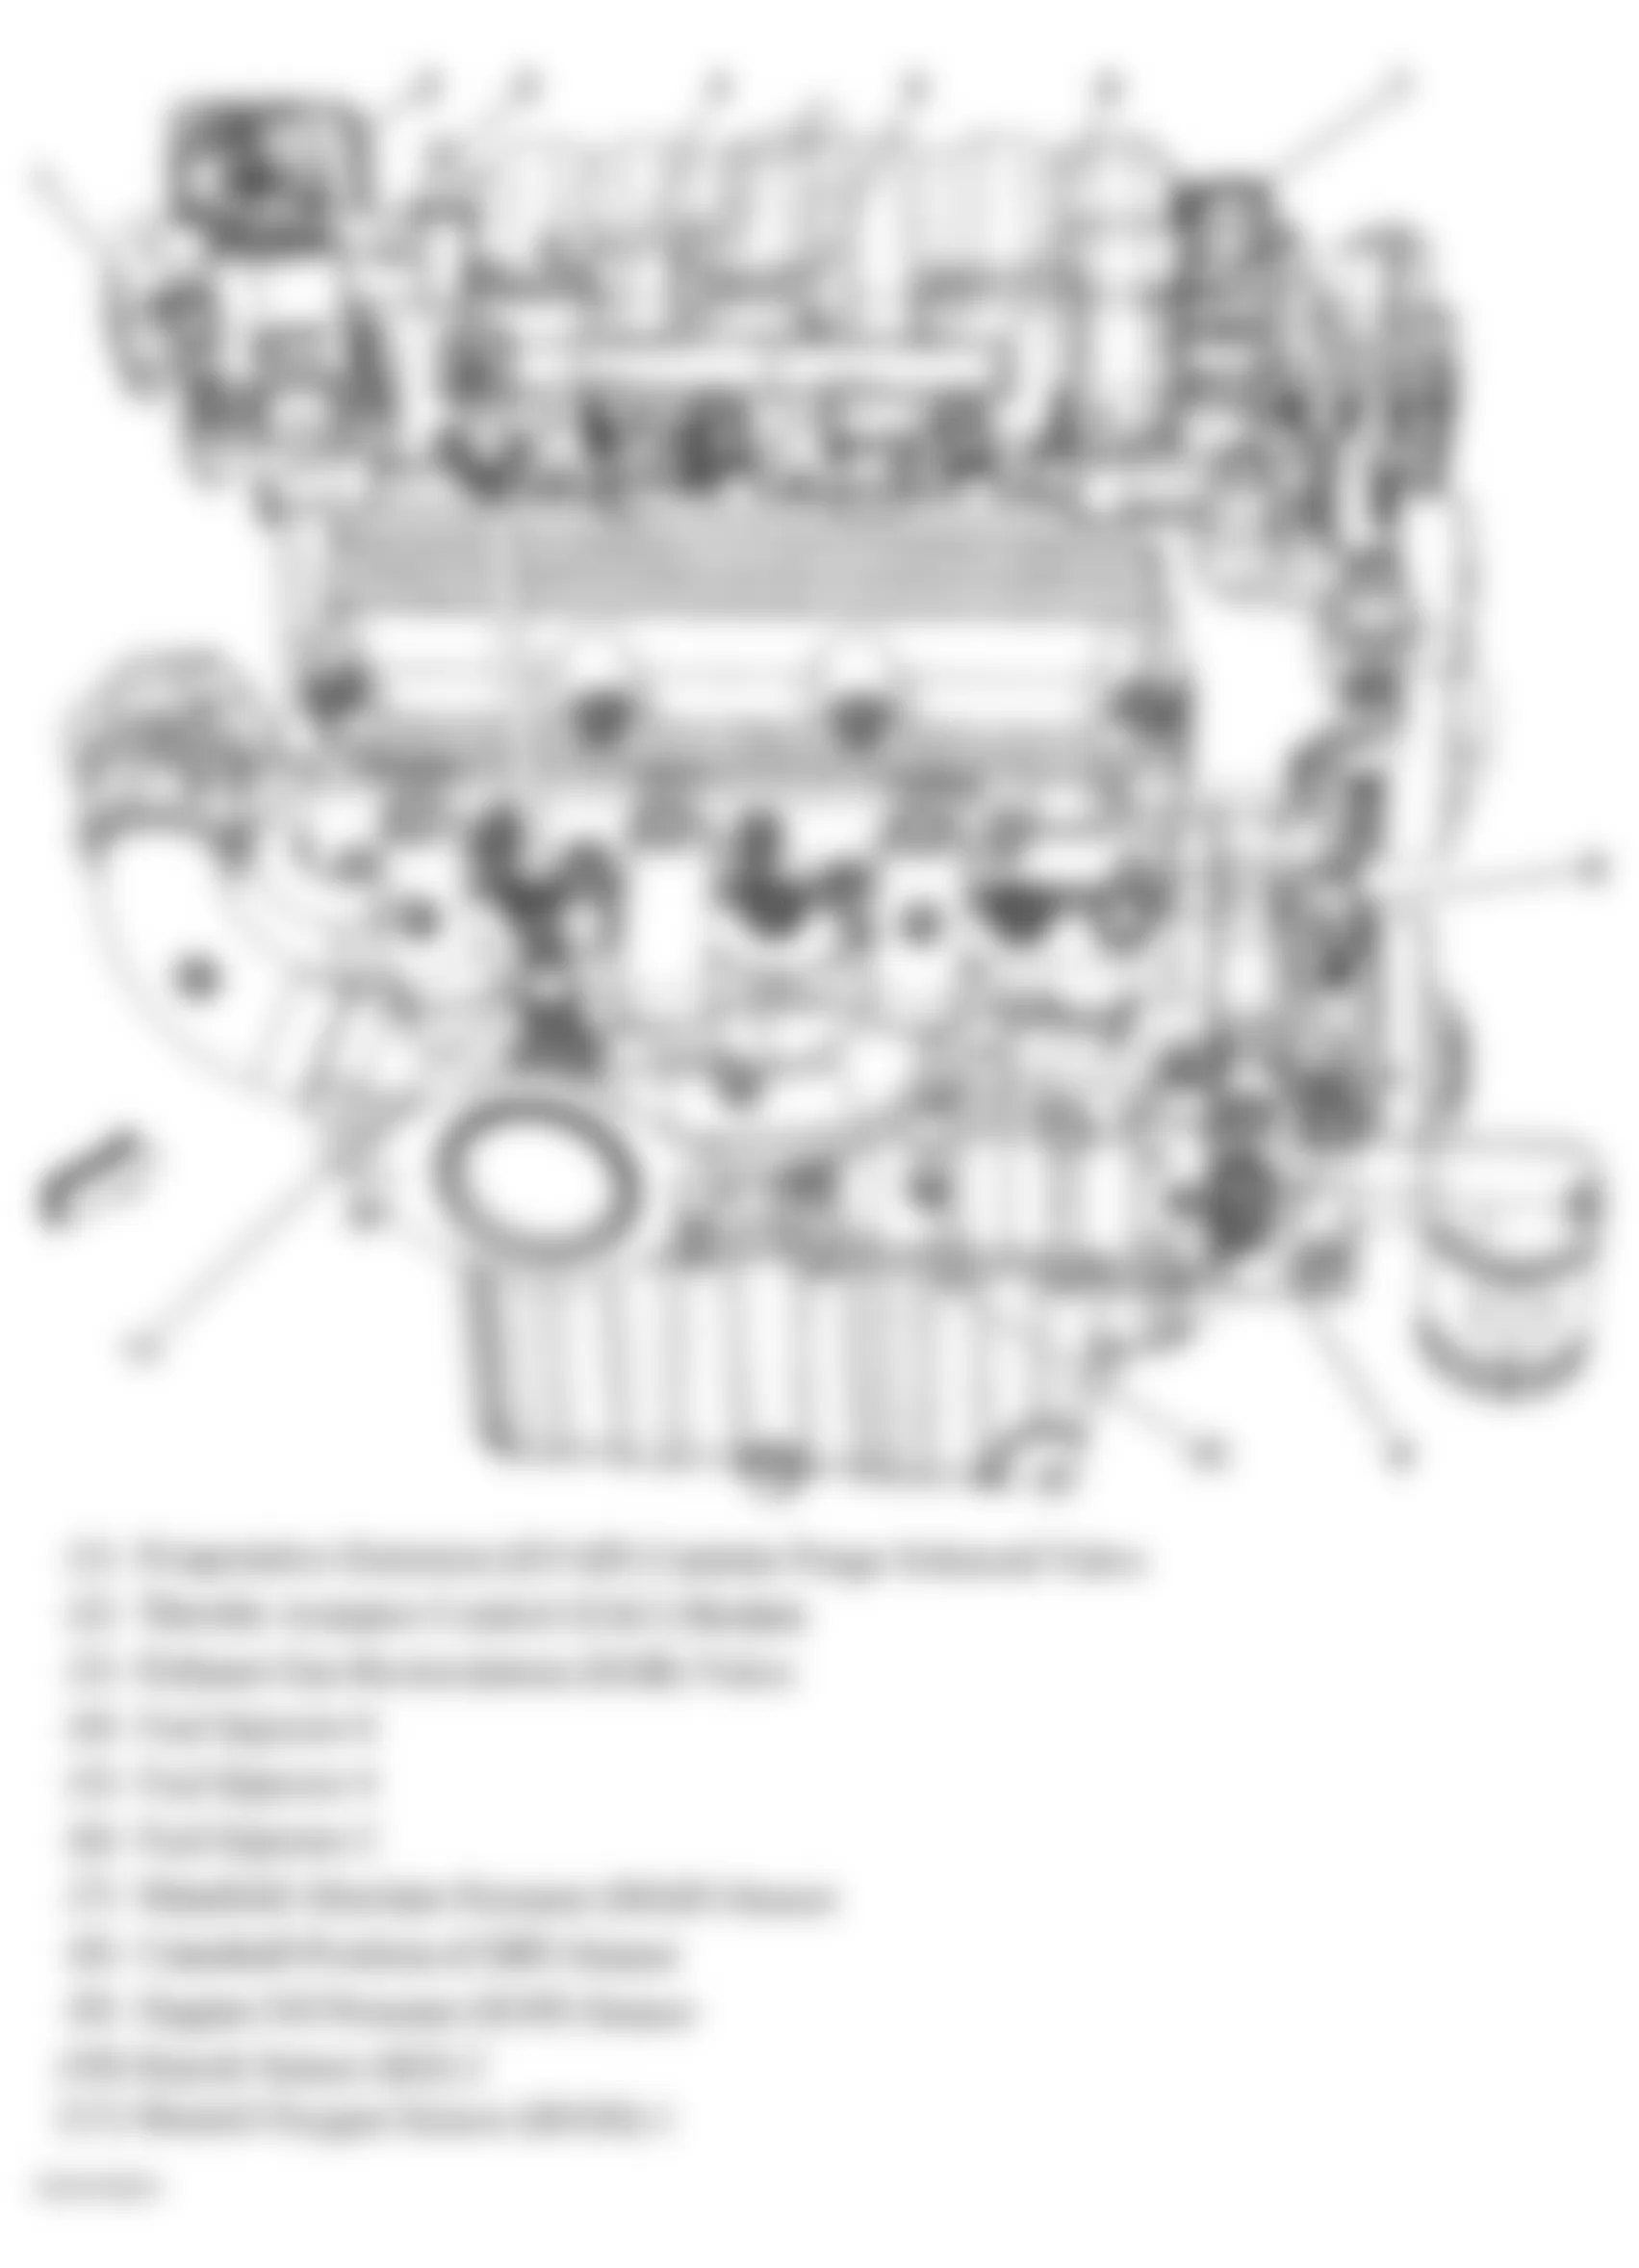 Buick Lucerne CXL 2006 - Component Locations -  Right Side Of Engine (3.8L)